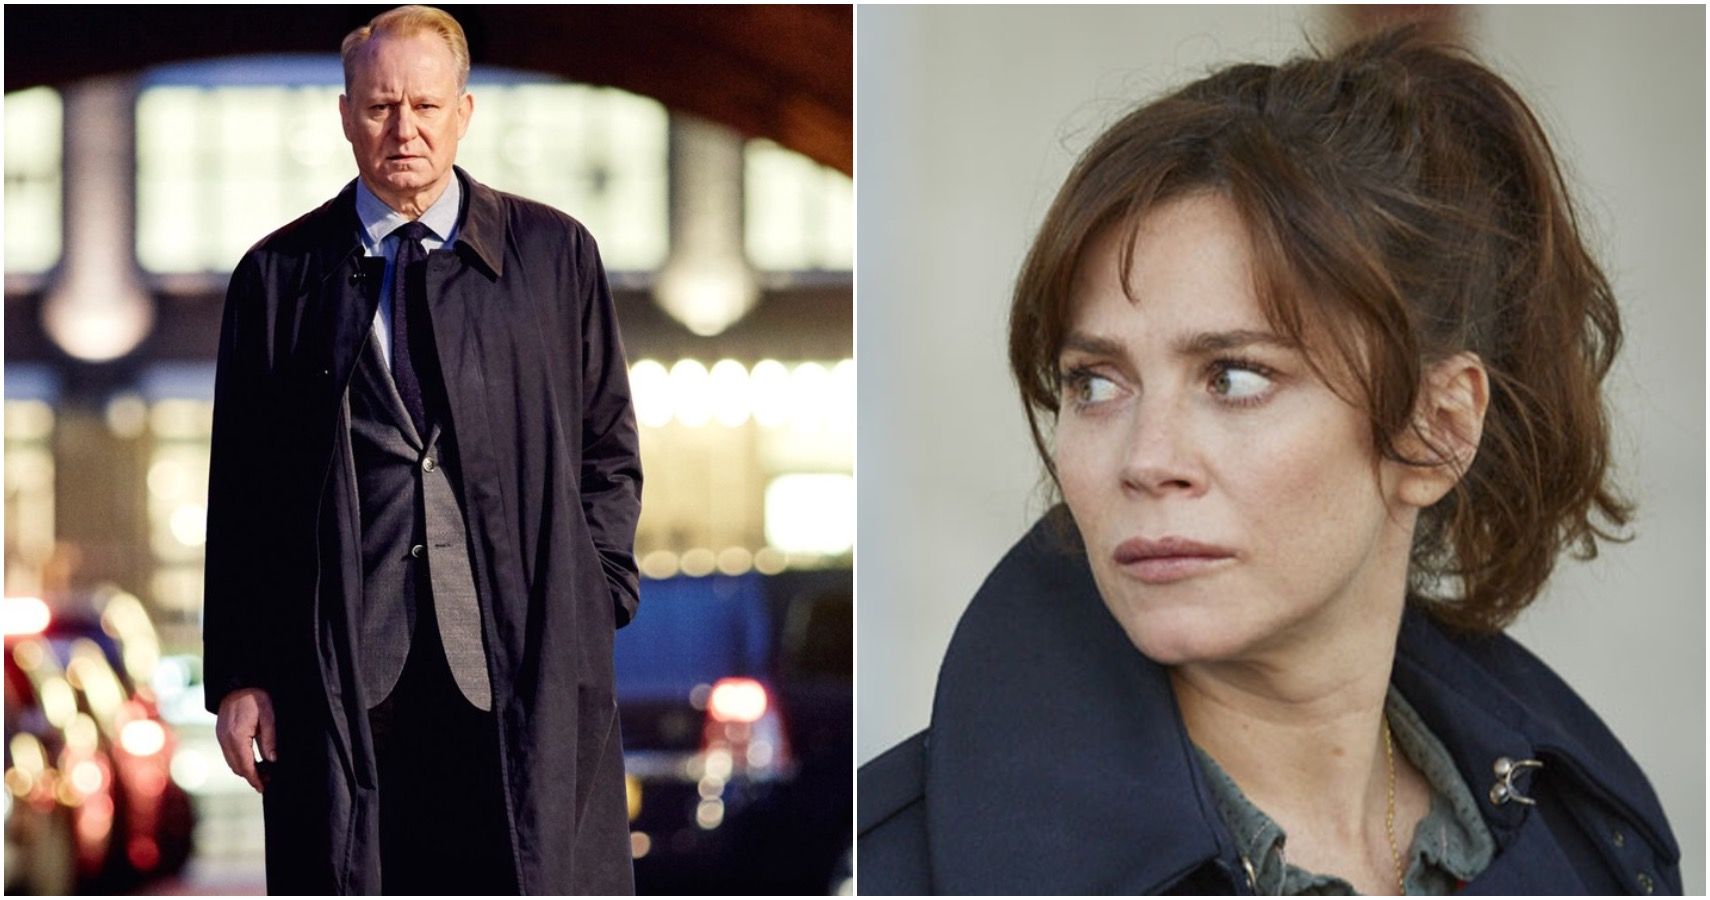 15 British Crime And Mystery Shows To Watch If You Liked The Stranger